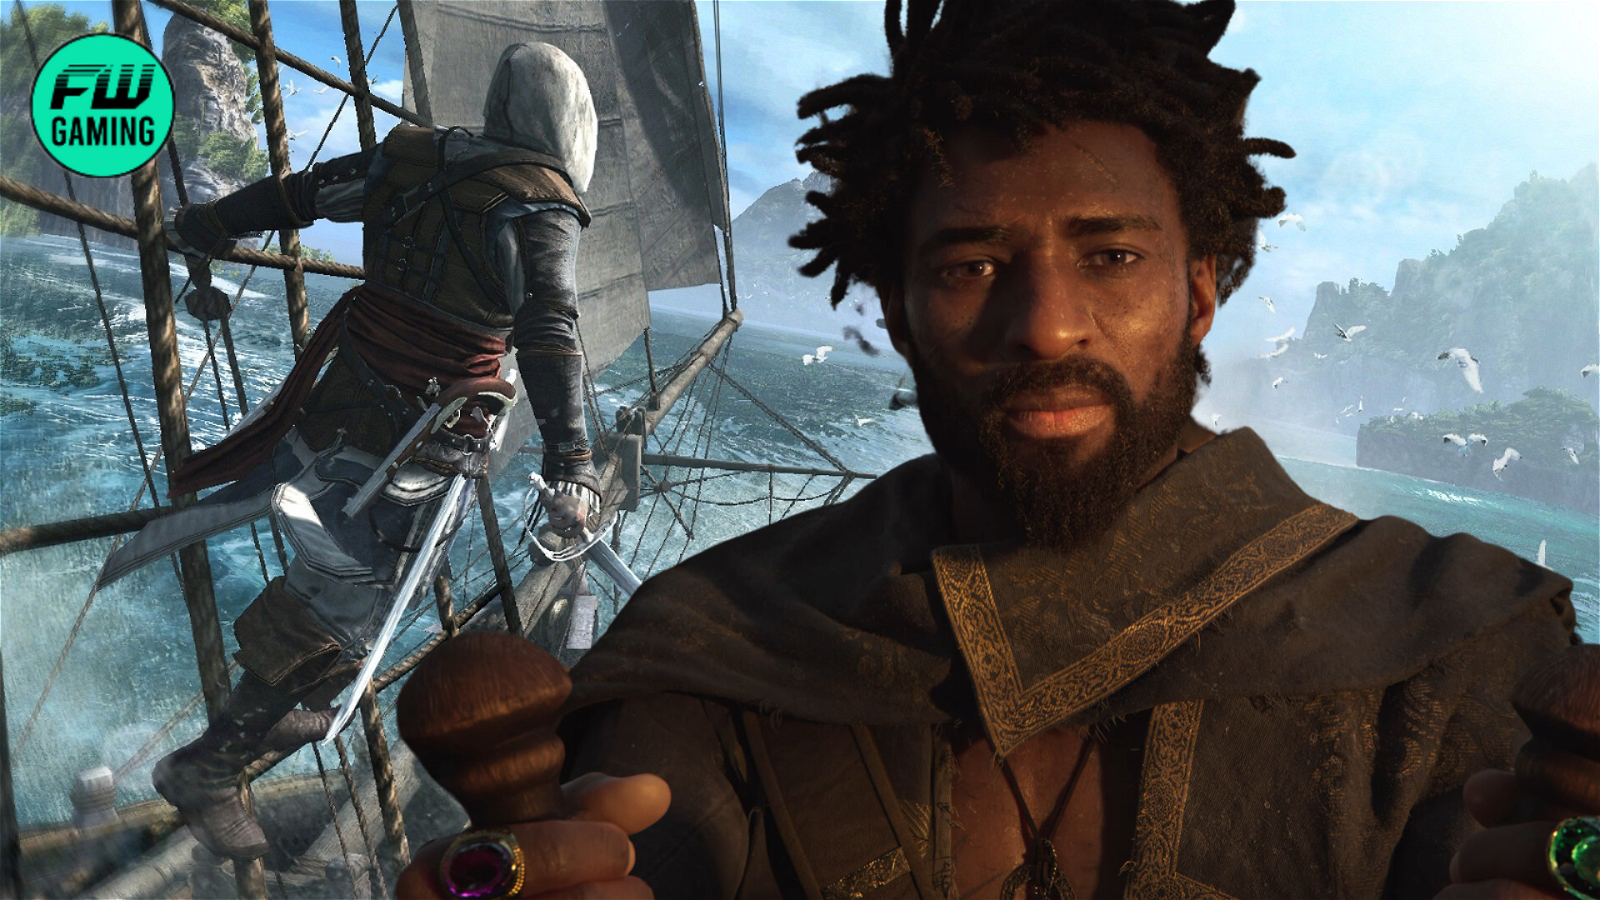 “It’s not even AAAA!”: Fans Are Turning to a ‘much better pirate game’ Than Skull and Bones, and Even Ubisoft Wouldn’t Dare Argue With the Choice